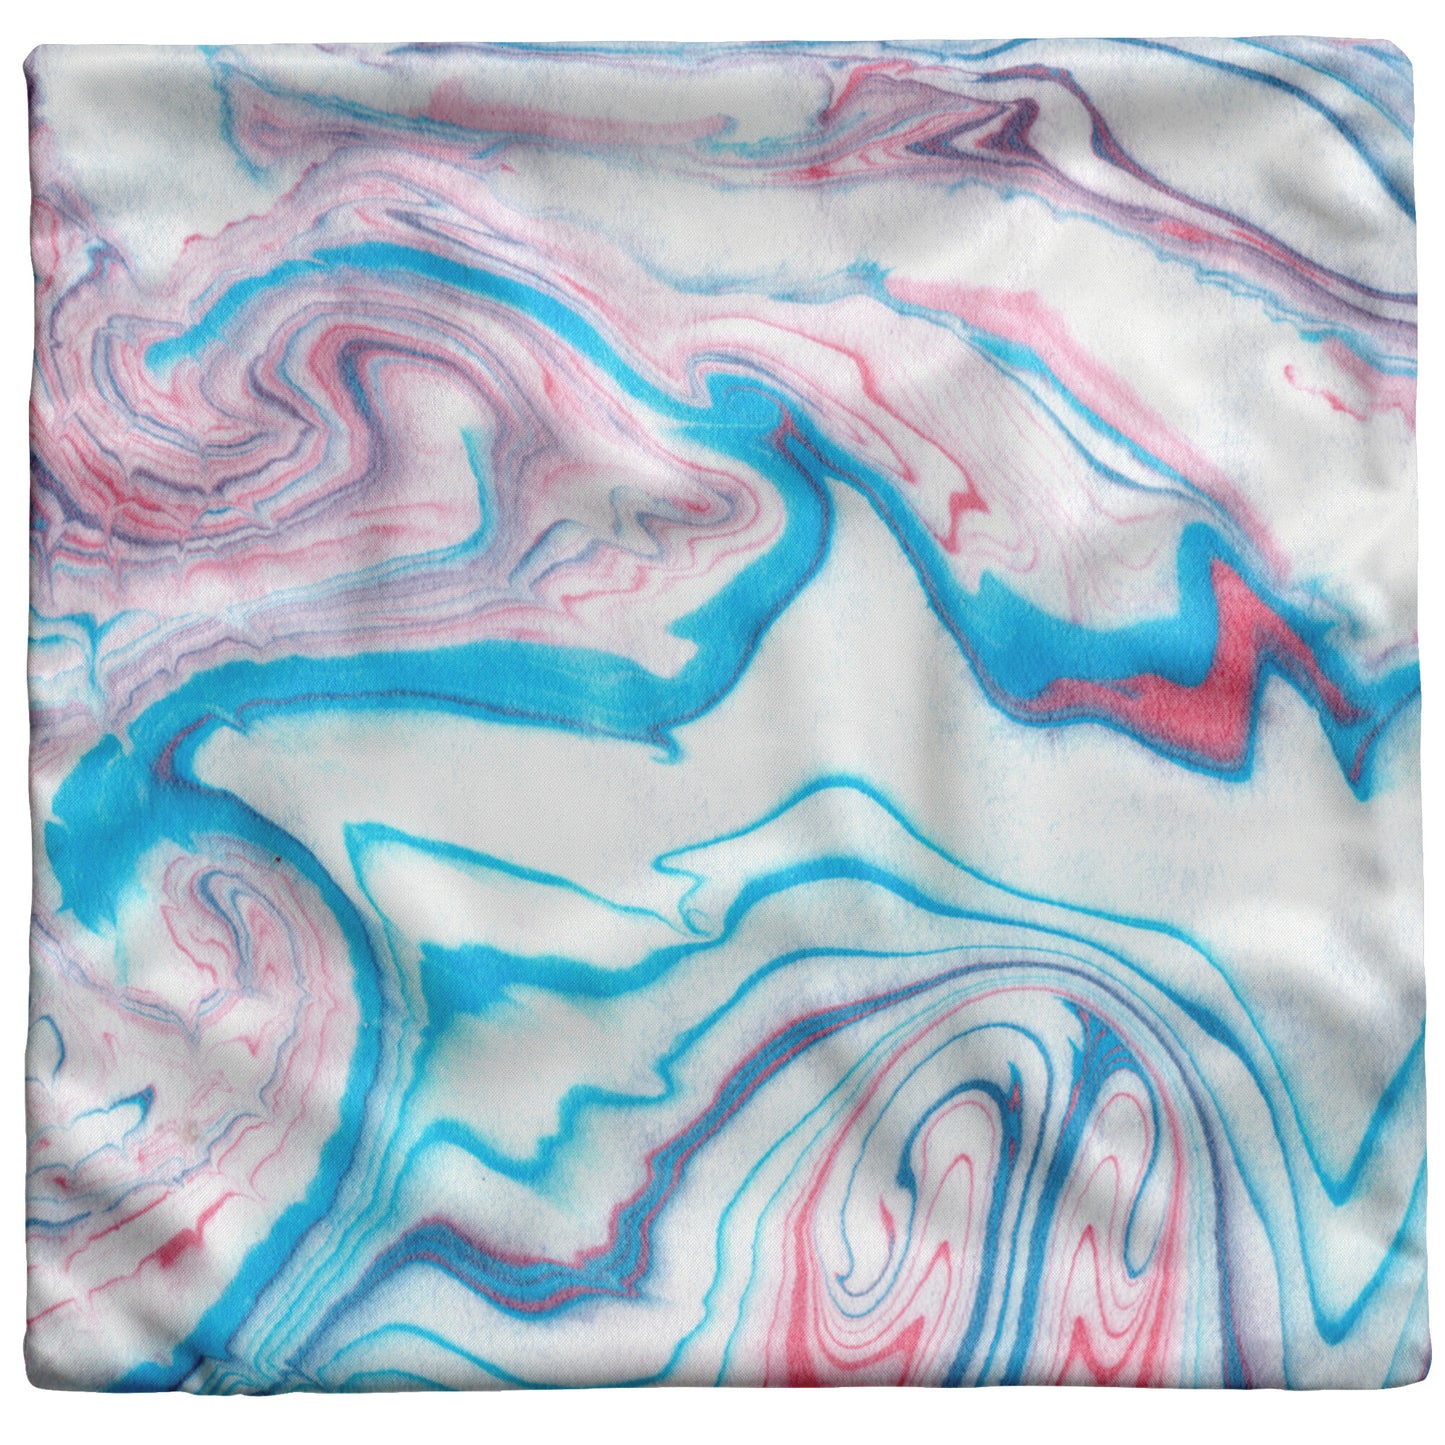 Abstract blue and red pillow design